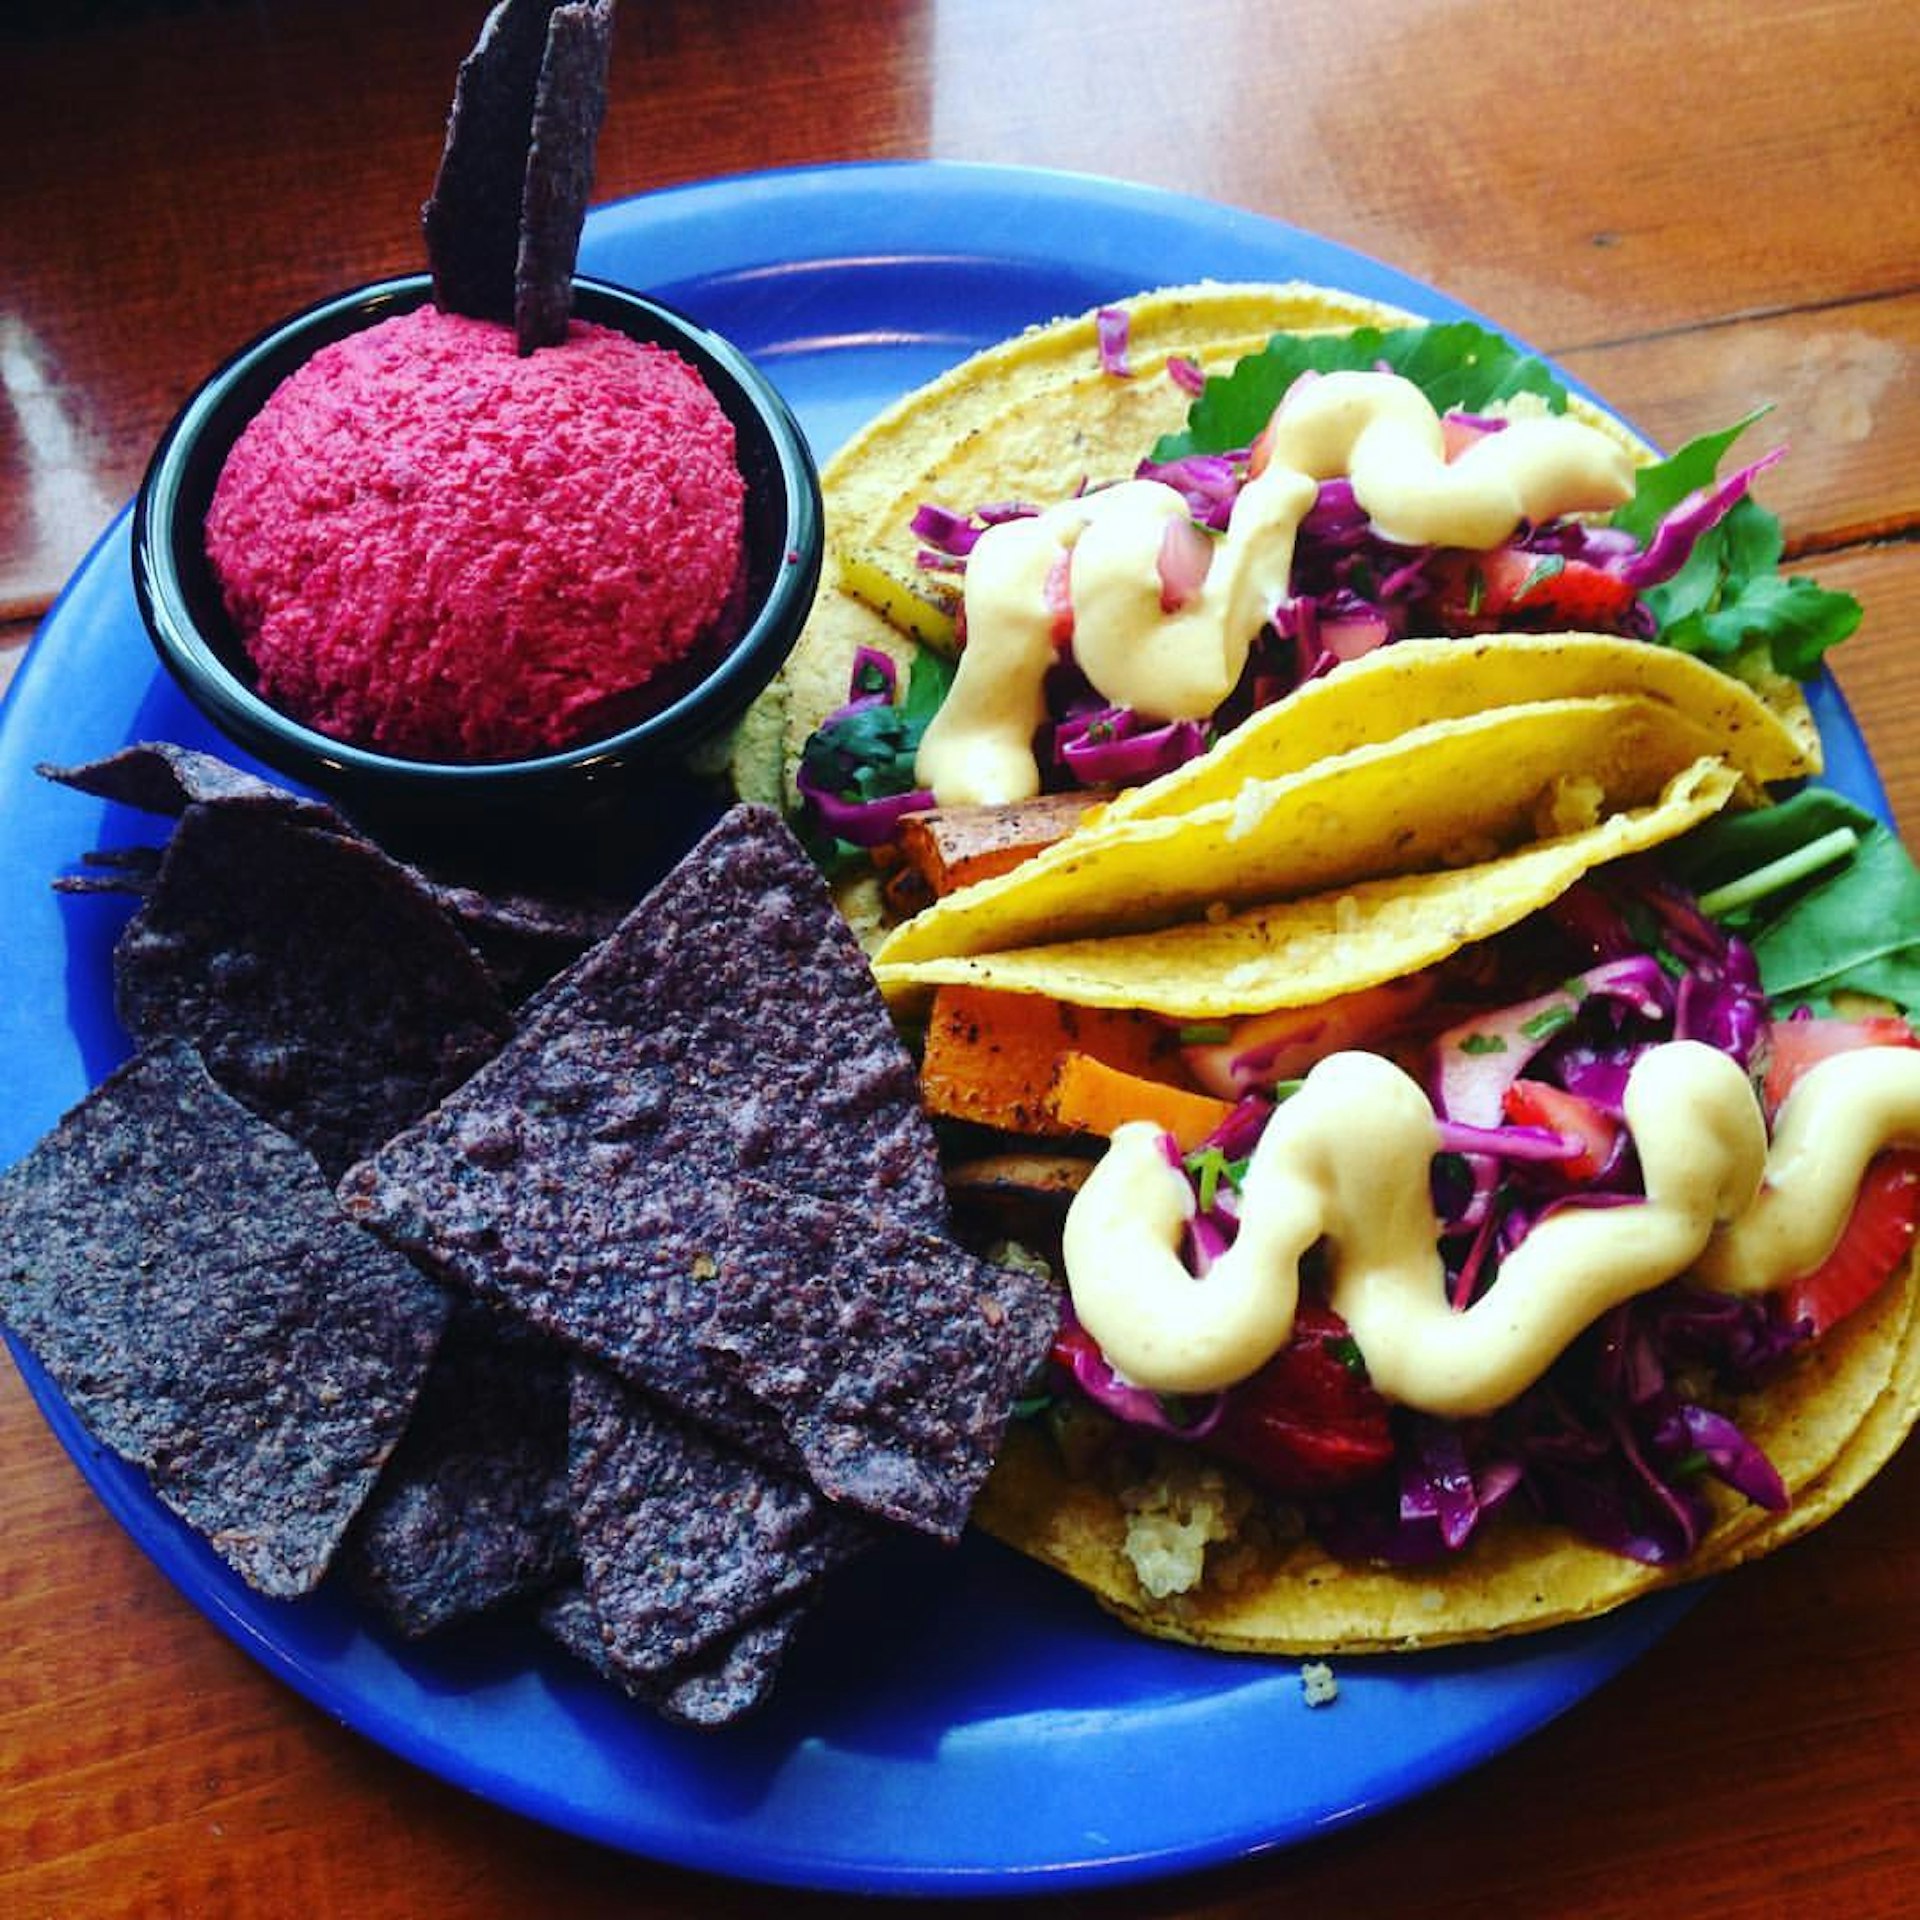 Electric blue plate holding a pair of soft-shell tacos filled with vegetables and herbs and topped with a creamy sauce; blue tortilla chips and small bowl filled with bright pink sauce.